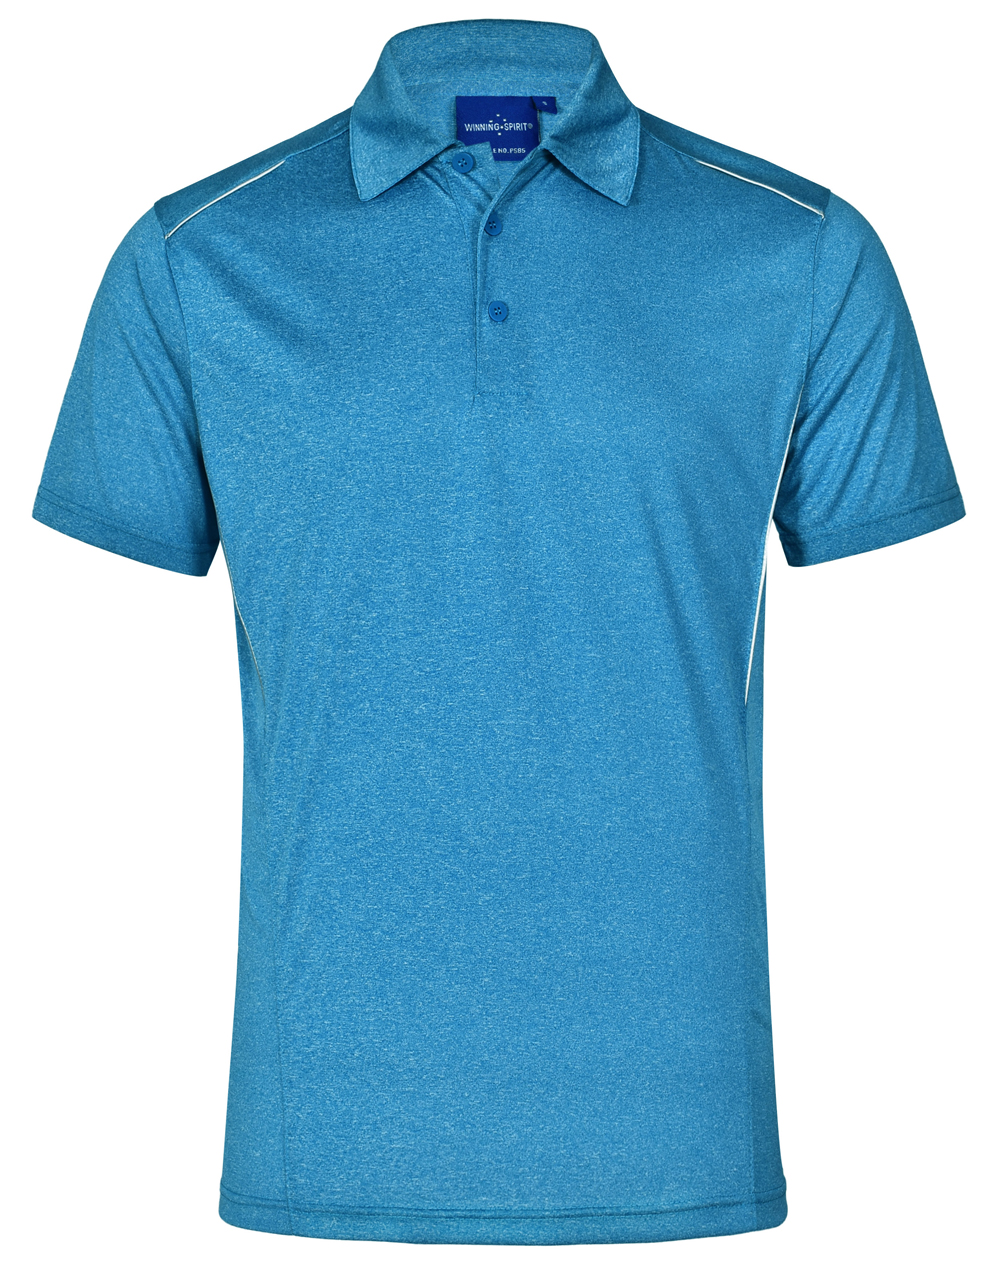 PS85/PS86 HARLAND POLO Men’s&Ladies’